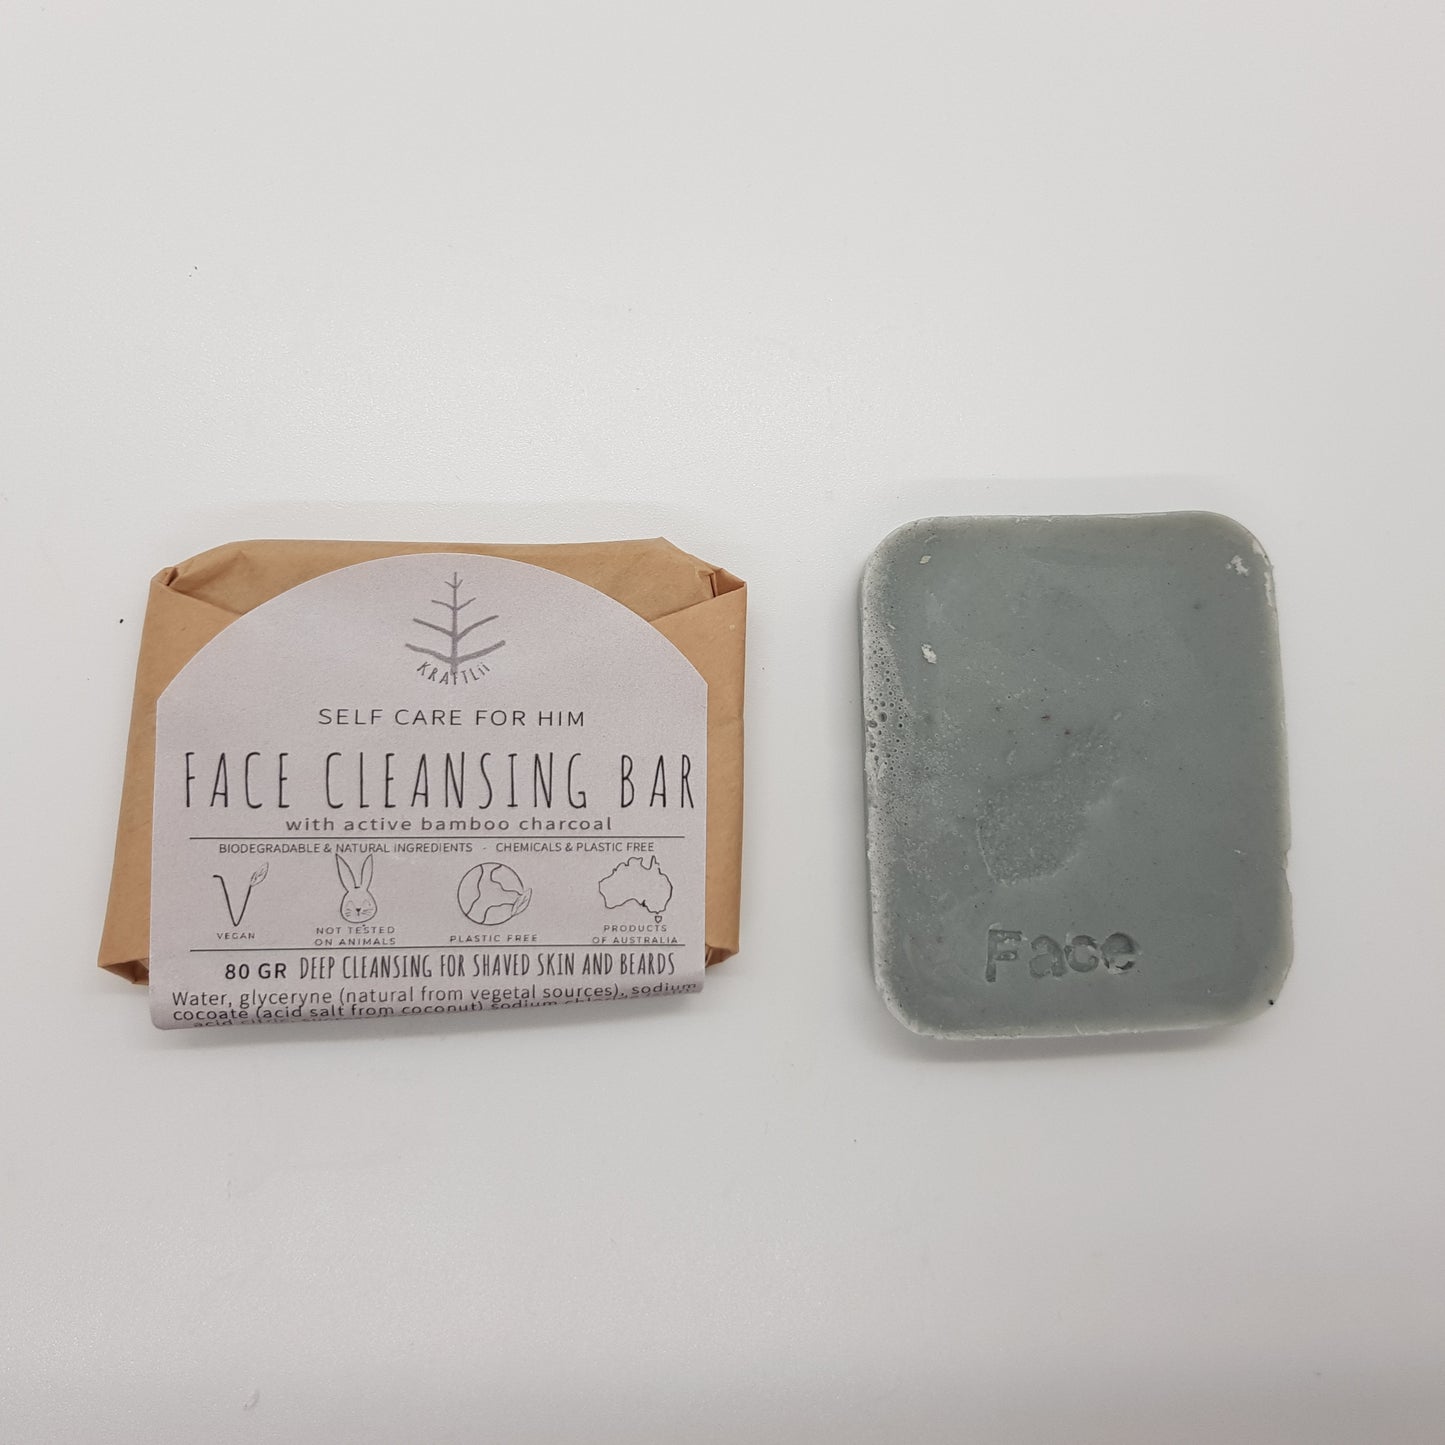 SELF CARE FOR HIM - Charcoal face cleansing bar